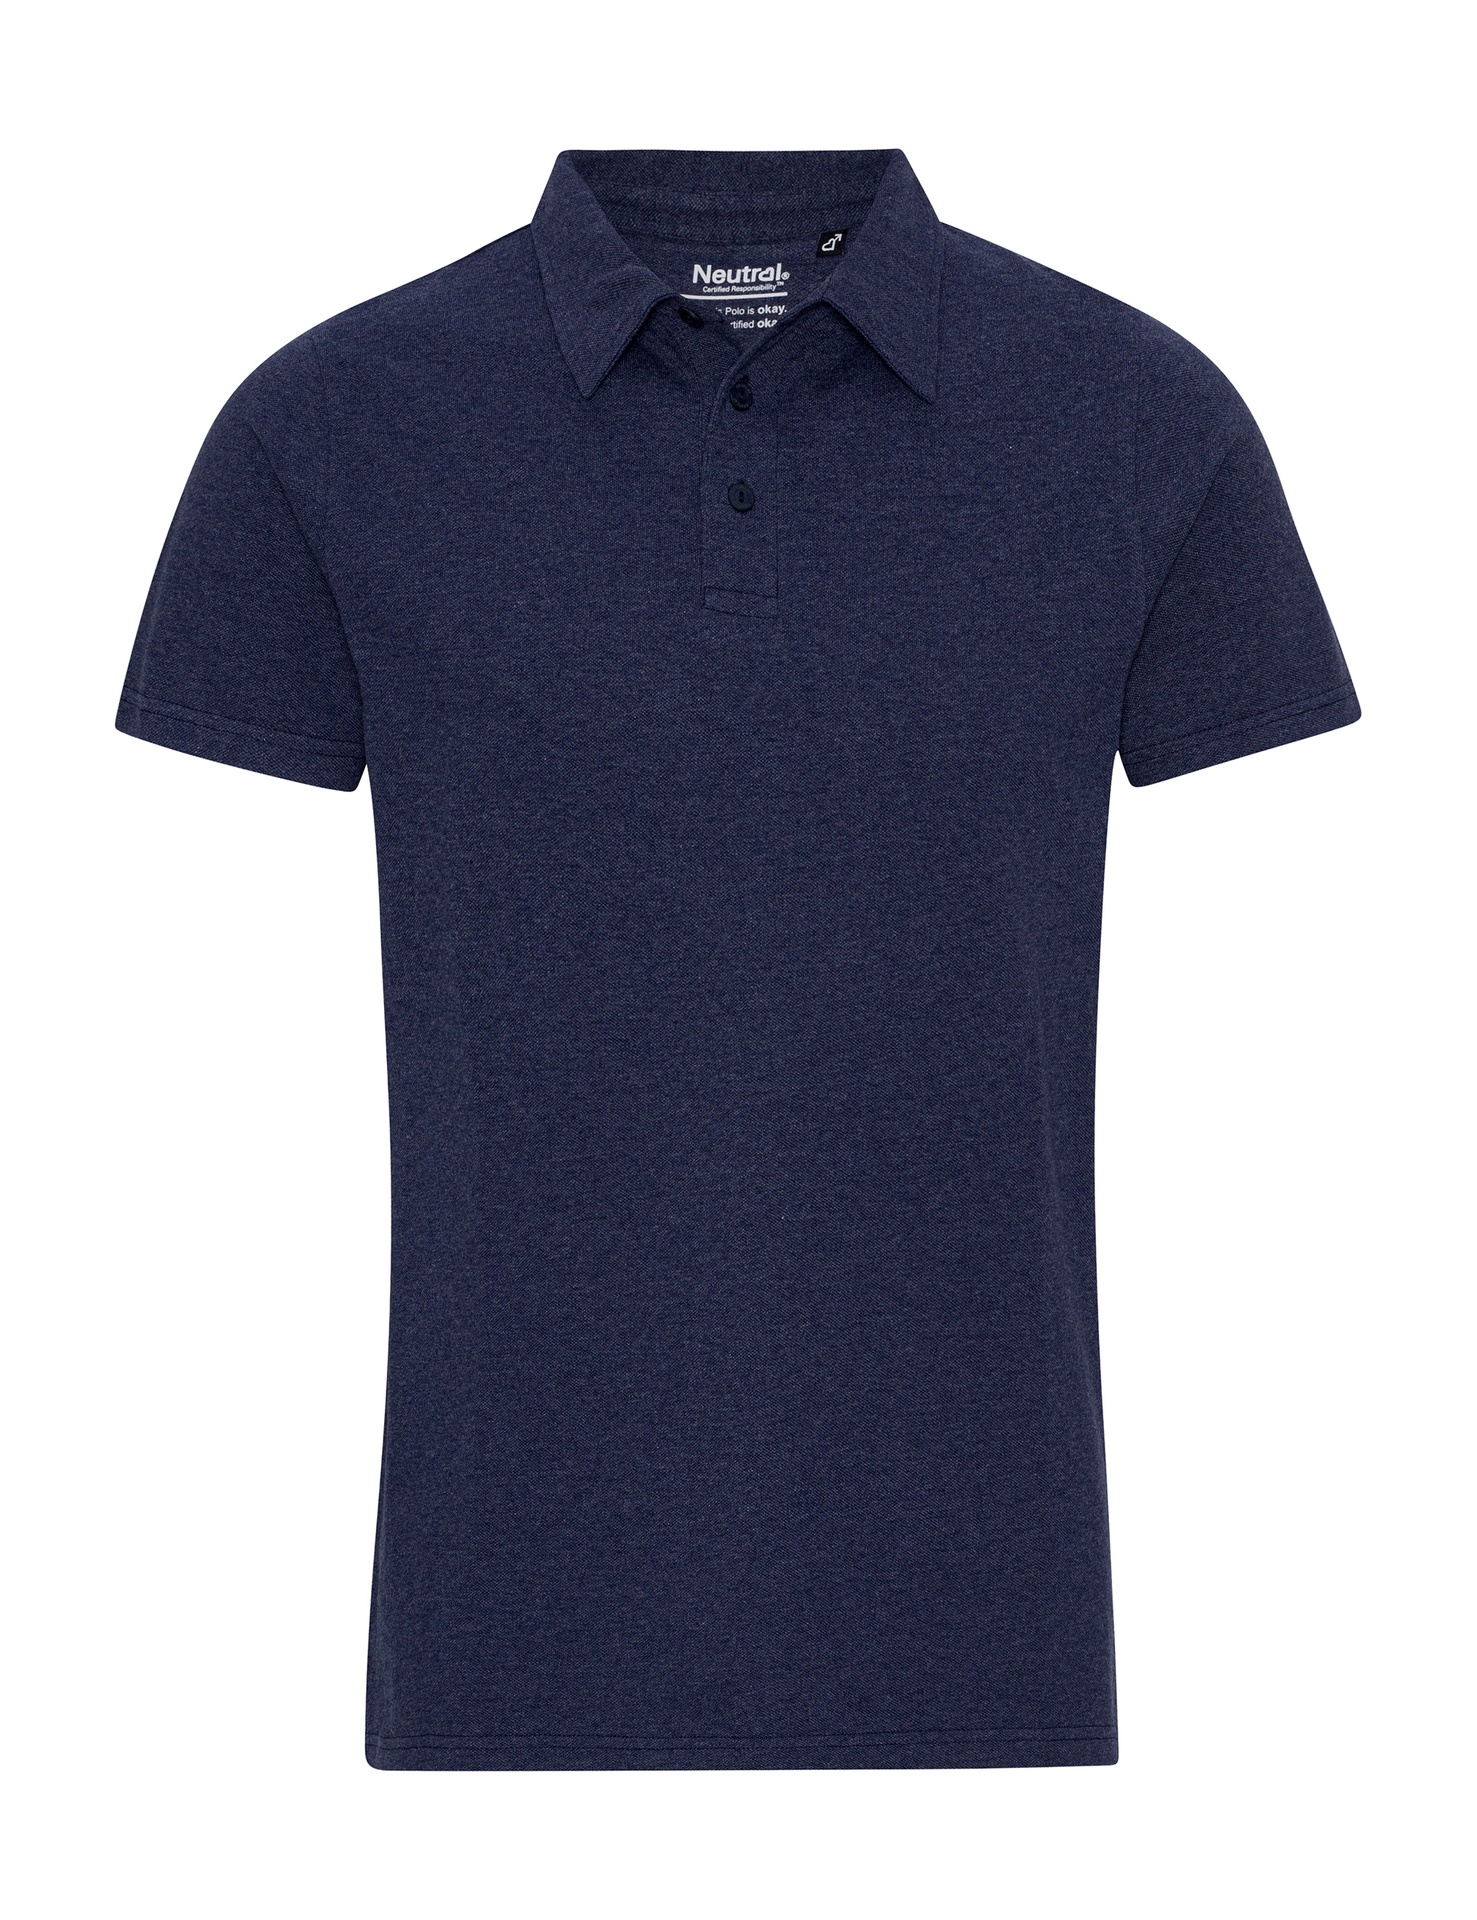 [PR/01014] RECYCLED COTTON POLO (Navy Melange 07, L)